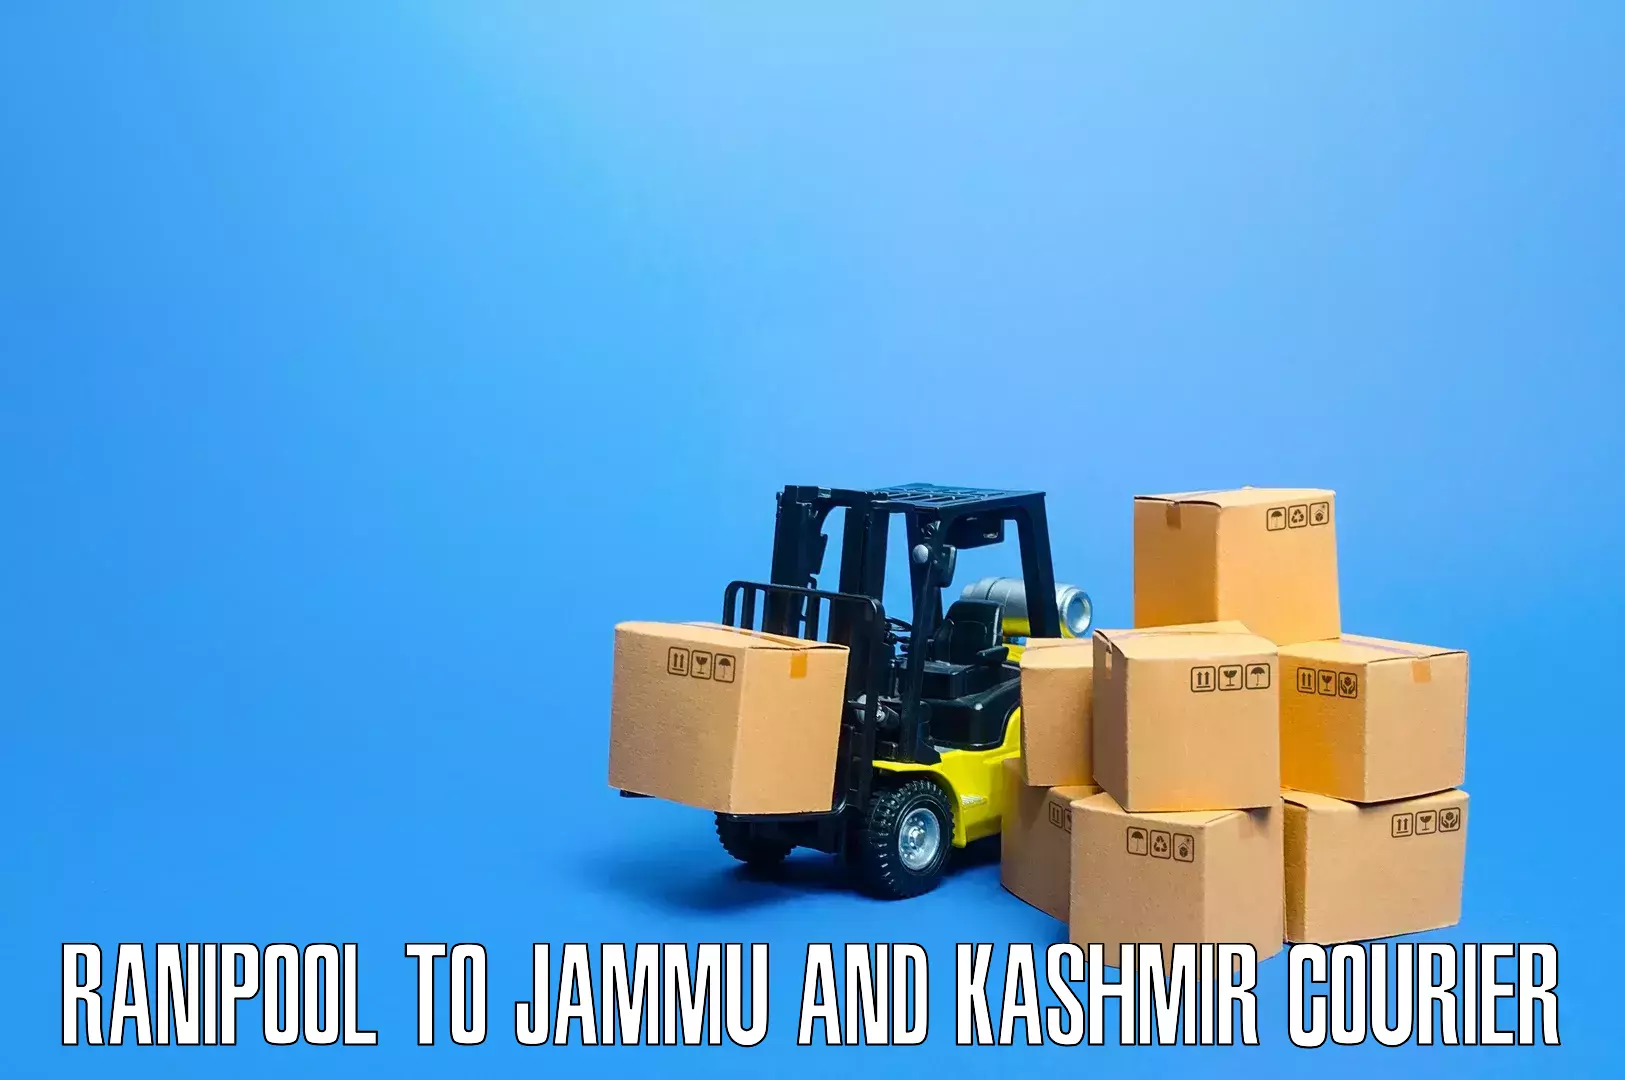 High-quality moving services Ranipool to Jammu and Kashmir